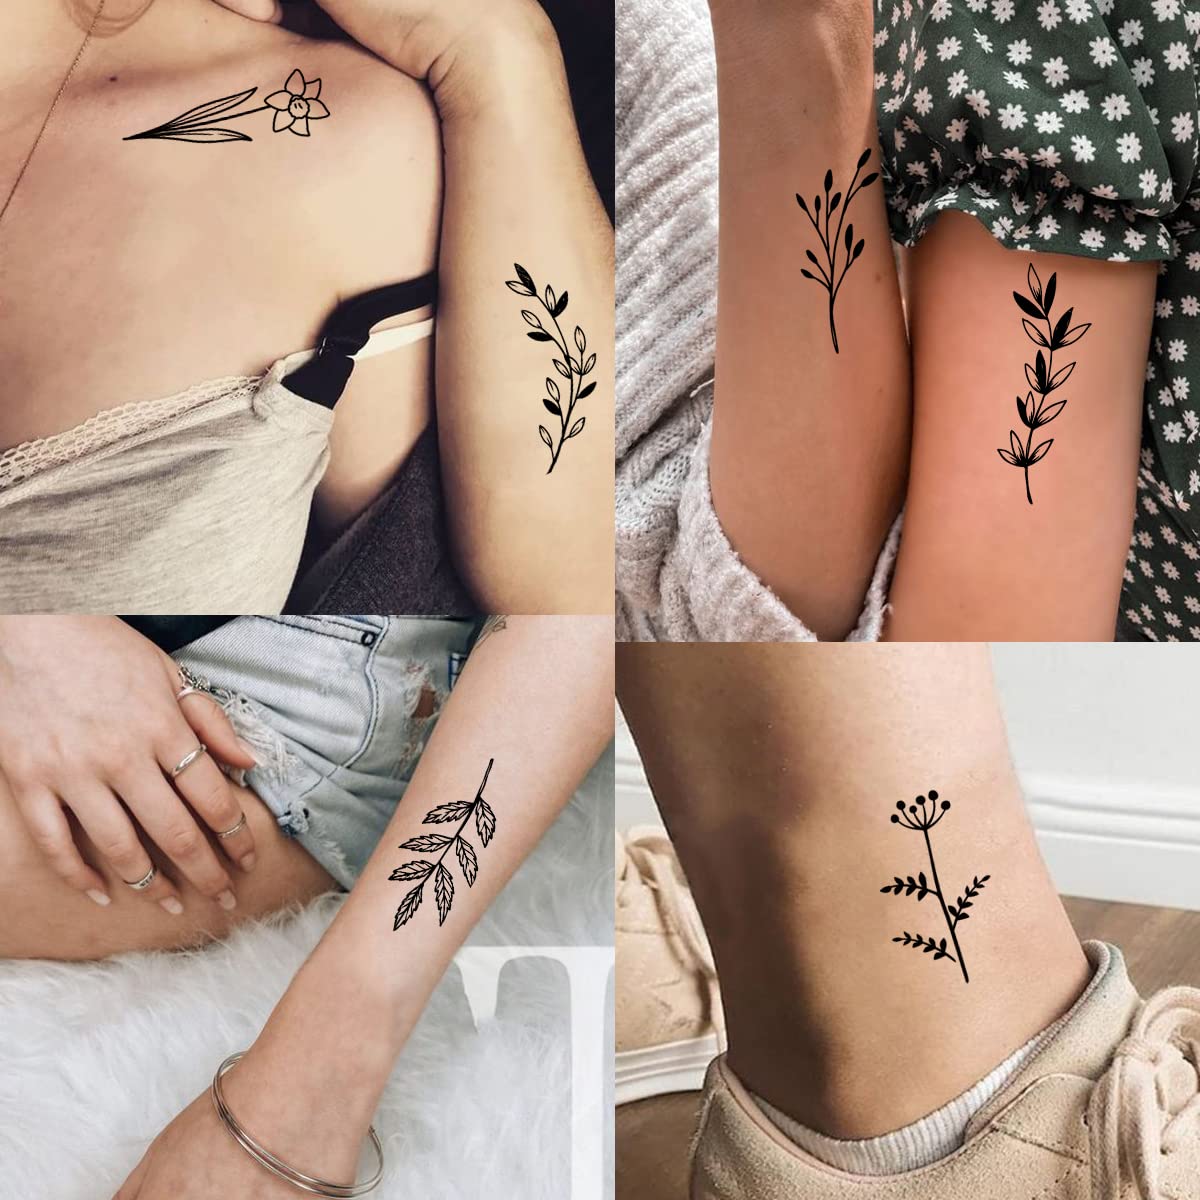 Tazimi 12 Sheets Black Flower Temporary Tattoos for Women Girls,Black Small Wild Floral Bouquet Tiny Branch Floral Wild Plants Sketch Tattoo Stickers for Women Body Art Arm